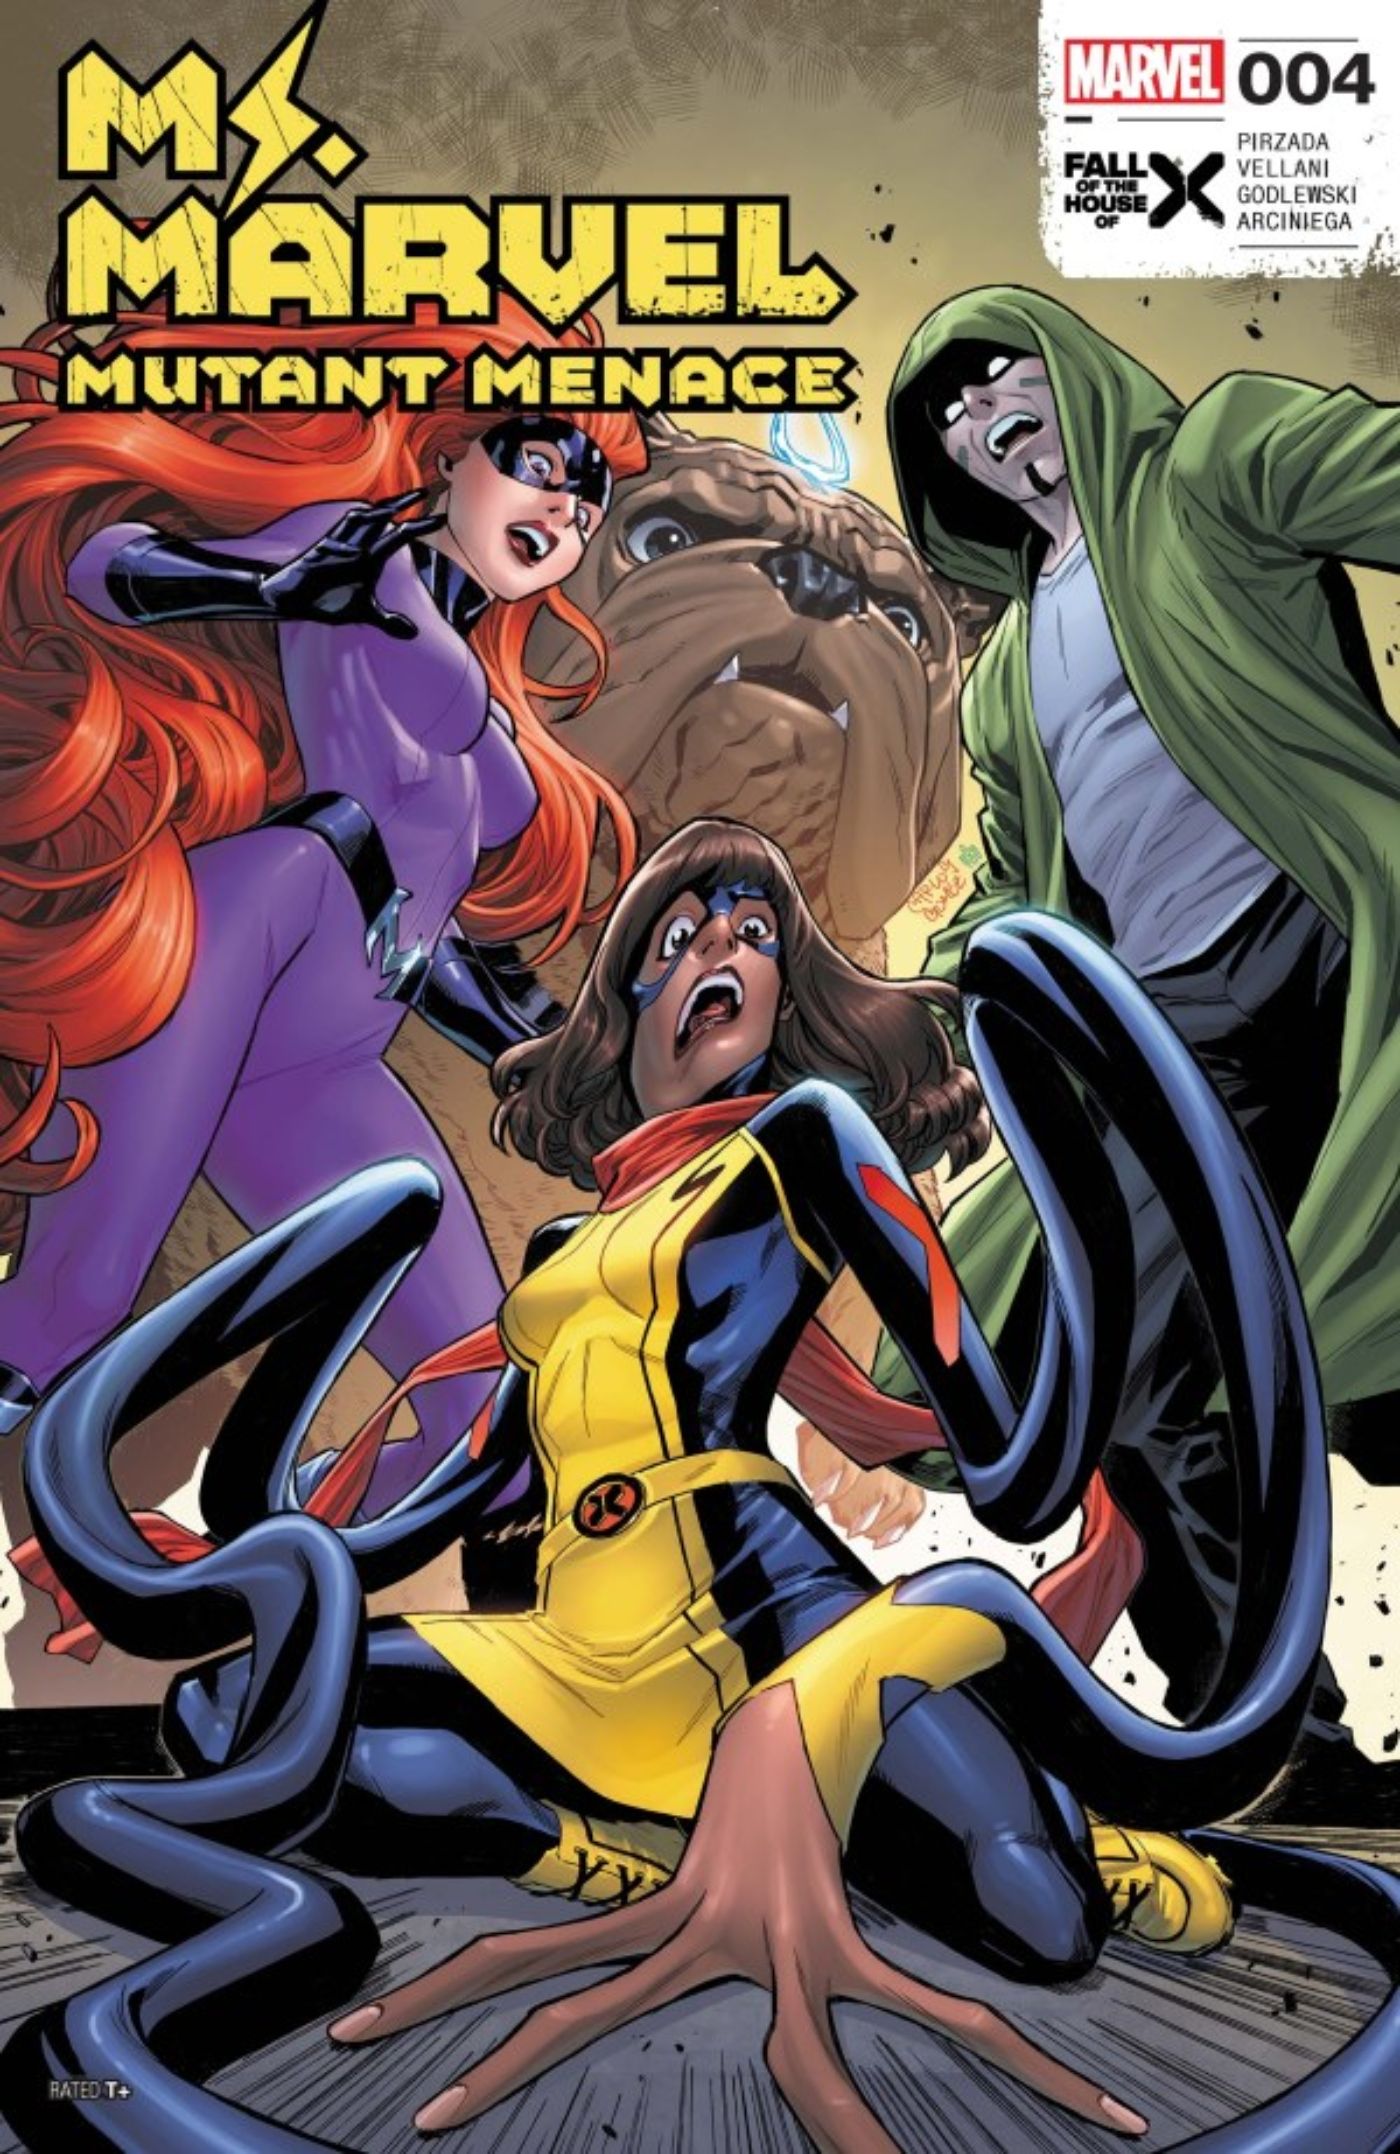 Ms. Marvel: Mutant Menace #4 cover featuring Ms. Marvel's powers going haywire.